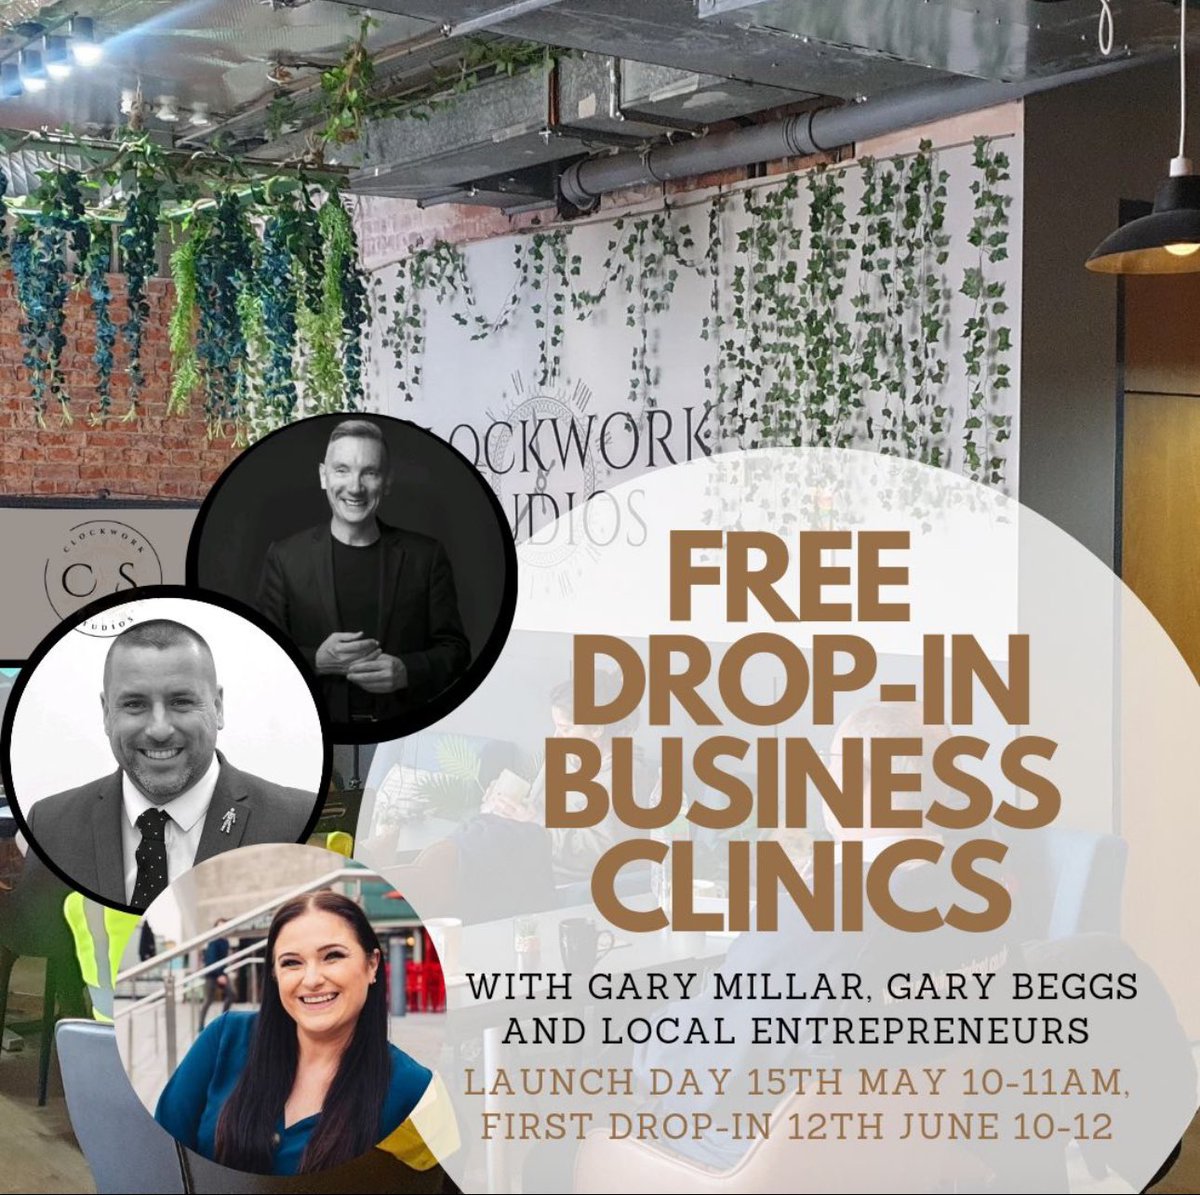 Love it when our volunteers take the initiative Thanks to long term volunteer @GaryBeggs_8 for leading on this new free drop-in business clinic in Prescot’s Clockwork Studios Launch 15 May 10-11 1st session 12 Jun 10-12 See you at the launch #freebusinesssupport #payitforward